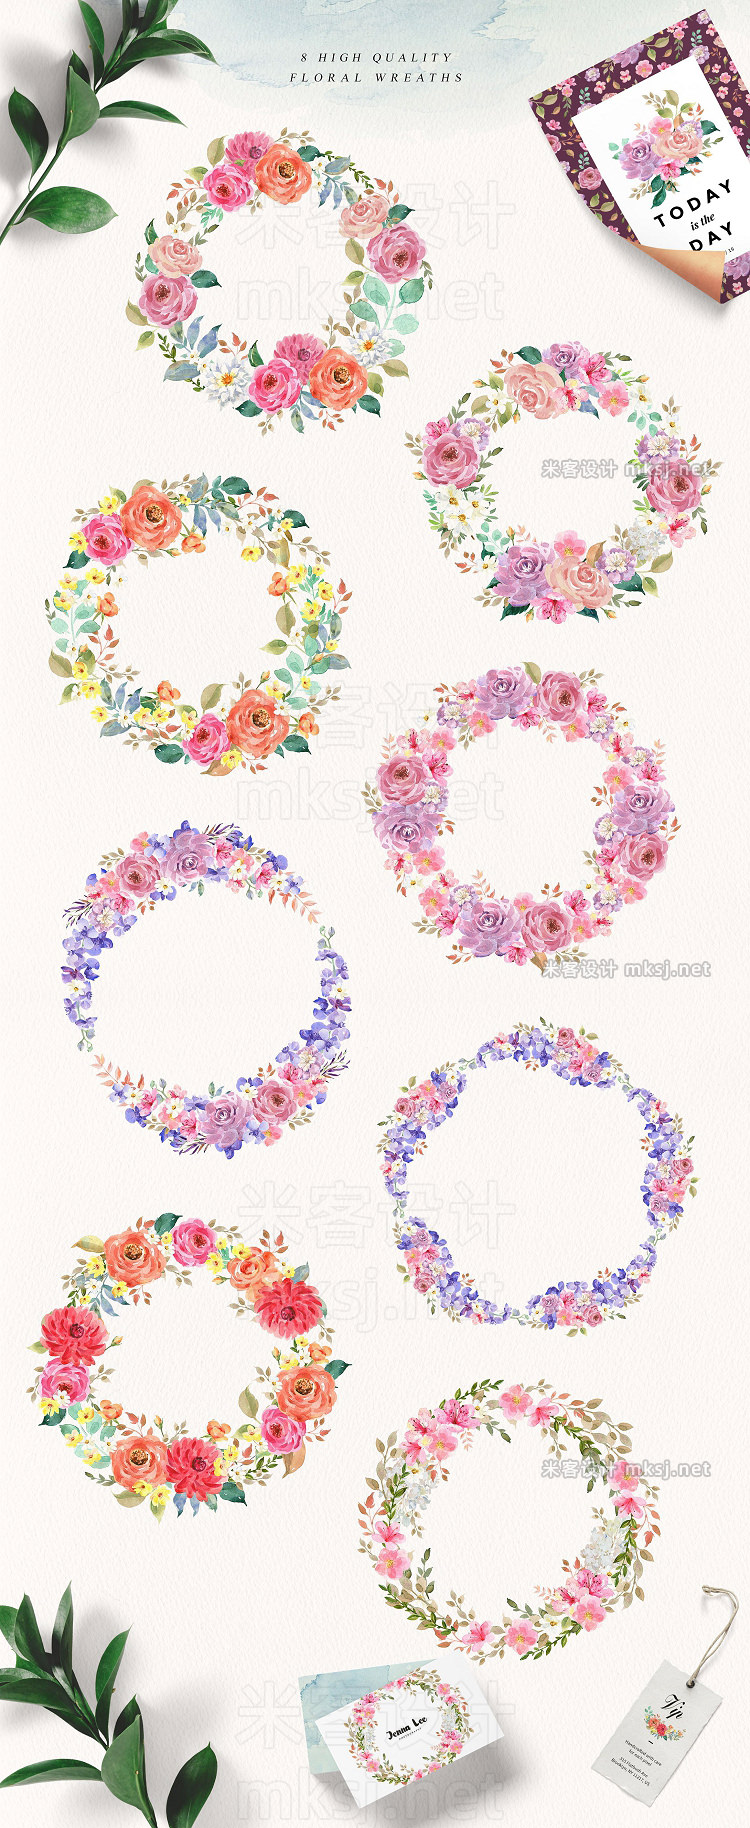 png素材 Watercolor Flowers - Olivia